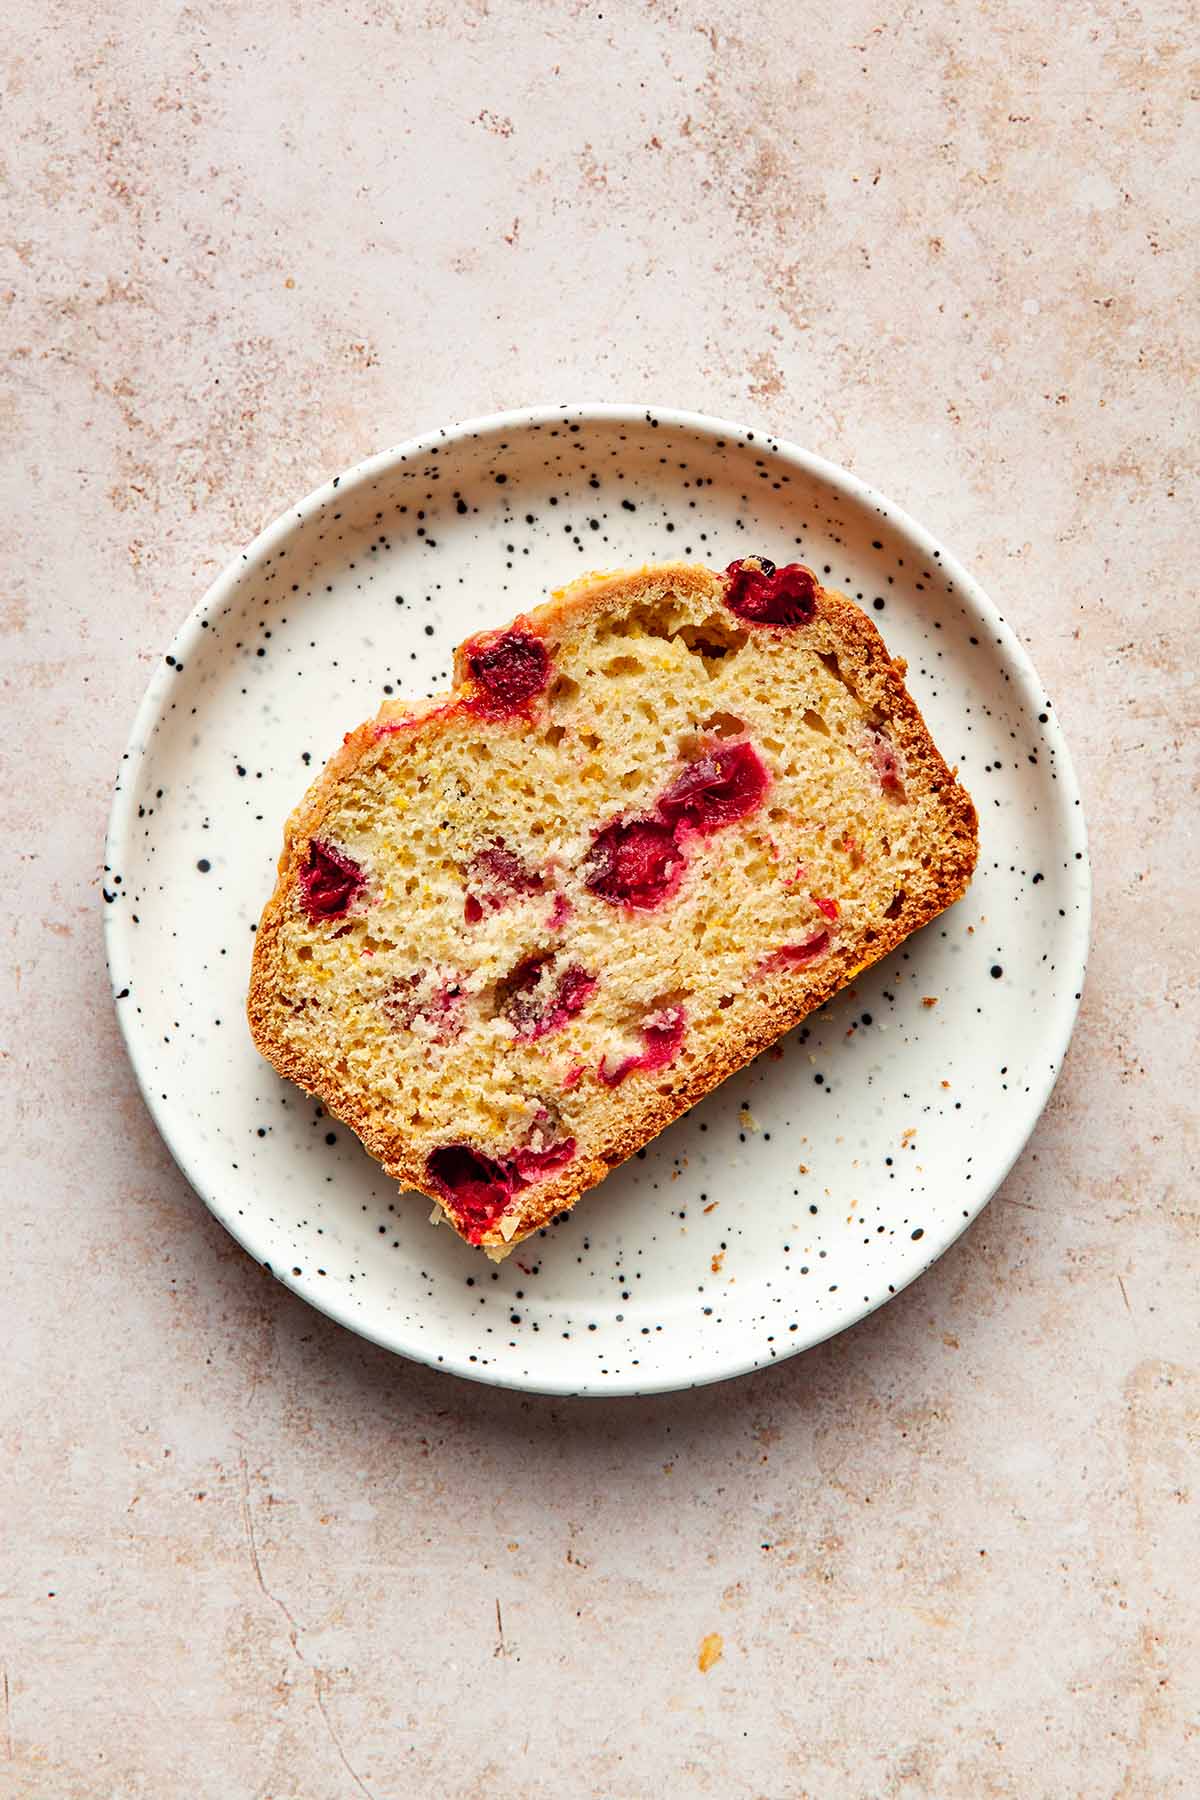 A slice of cranberry orange loaf on a small white speckled plate.